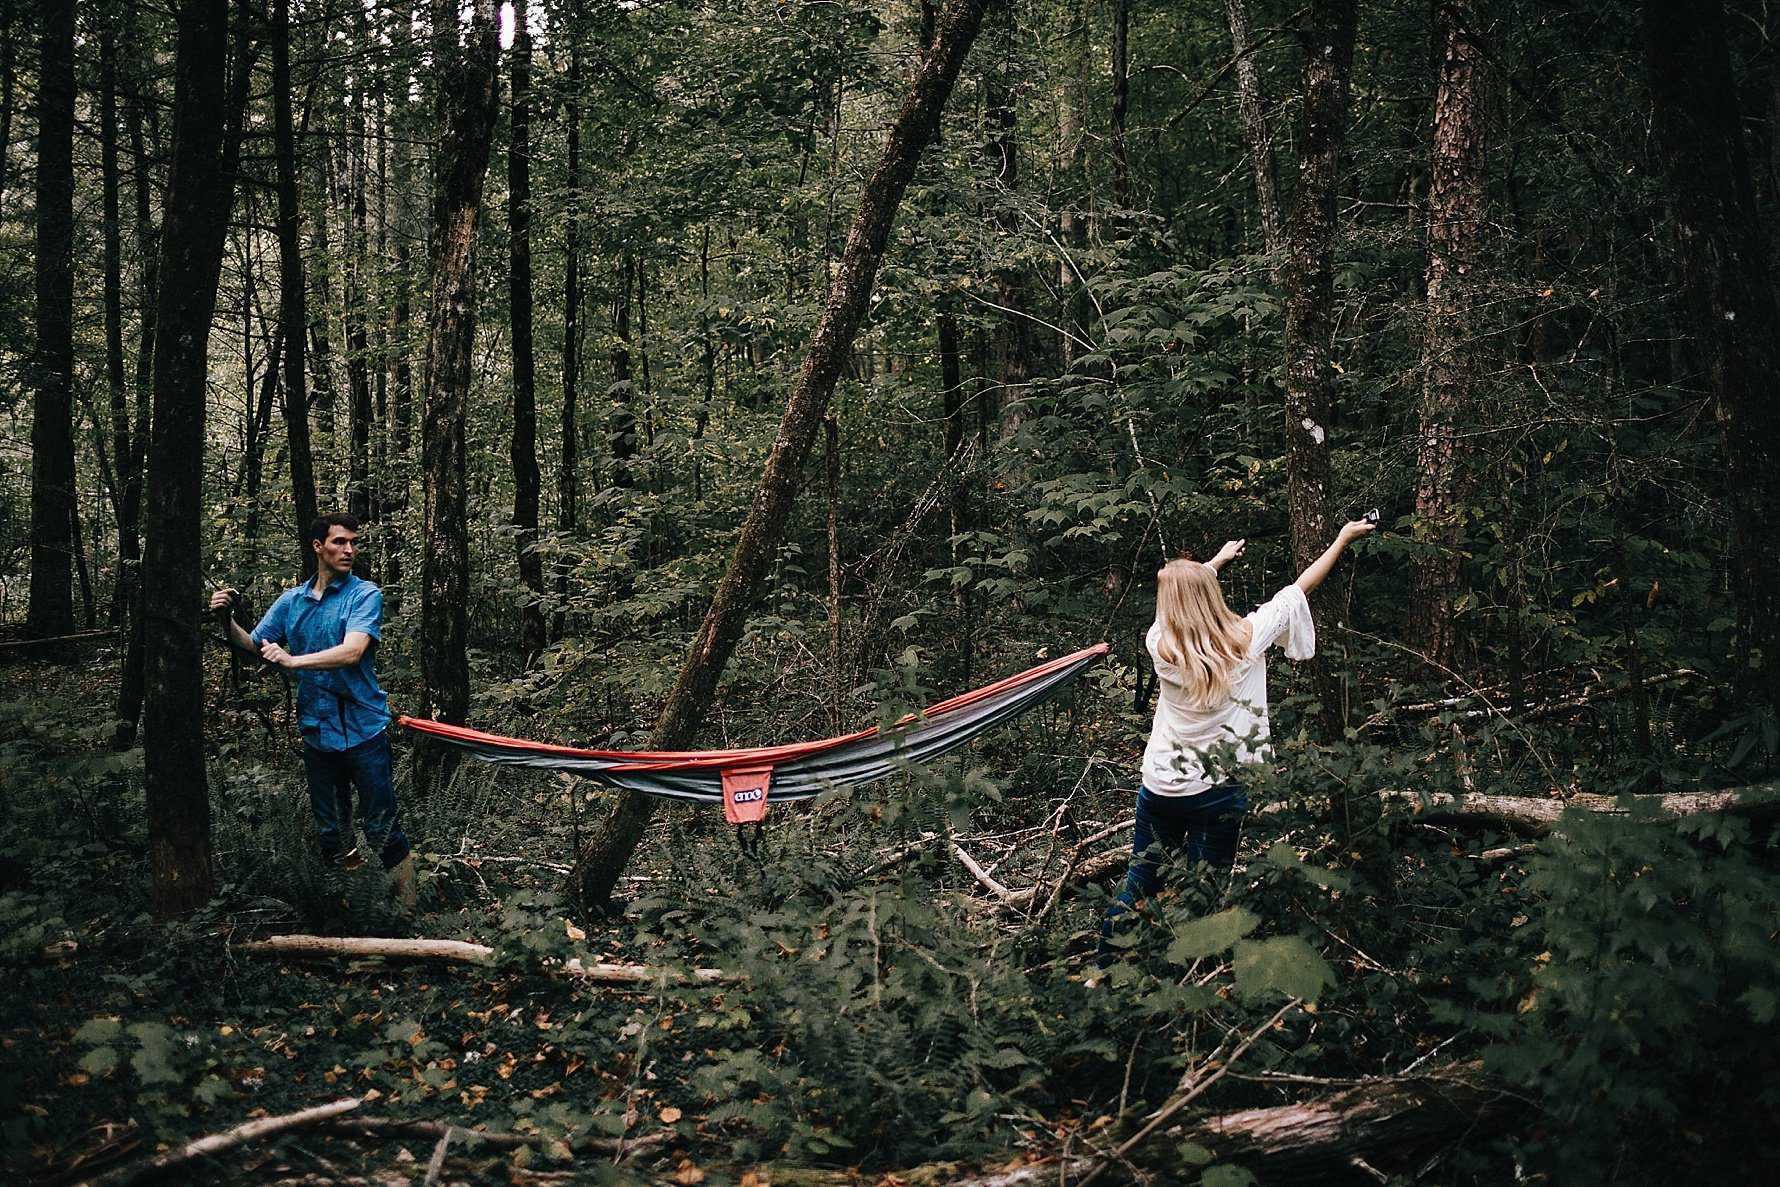 Hammock Engagement Photos in the Smoky Mountains | Erin Morrison Photography www.erinmorrisonphotography.com